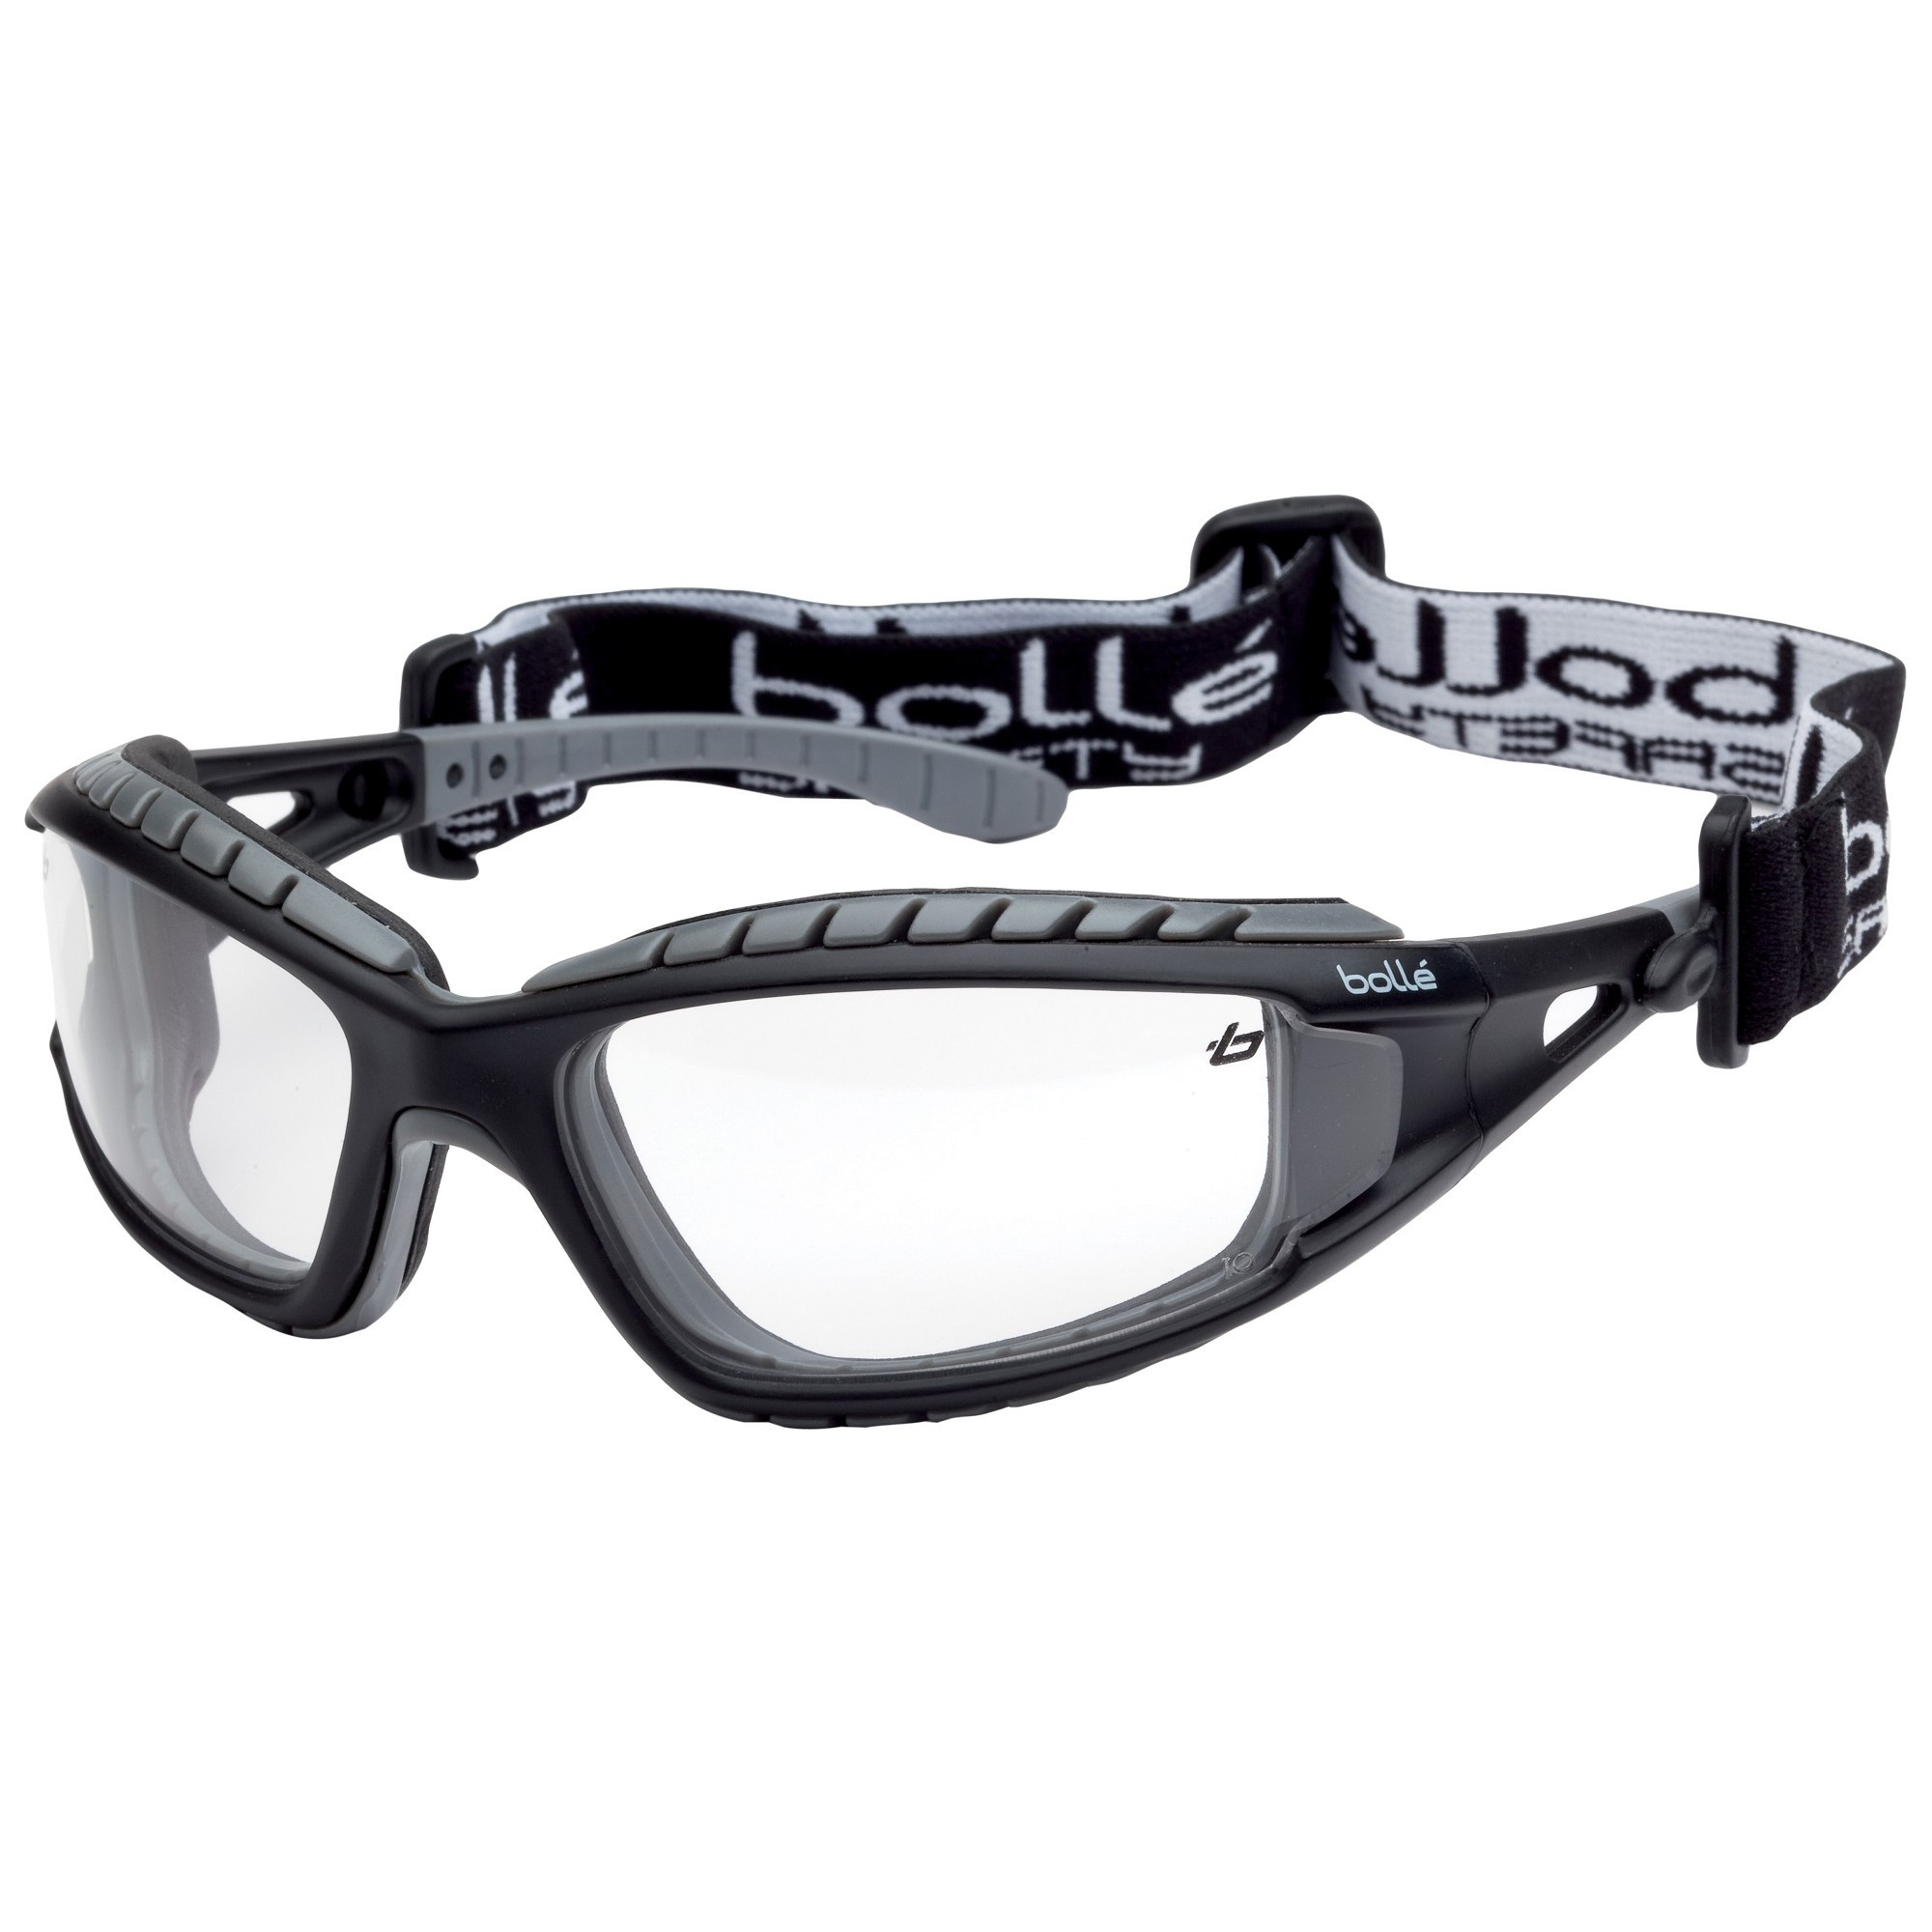 Bolle 40085 Tracker Safety Glasses Goggles Black Grey Temples Clear Anti Fog Lens Full Source